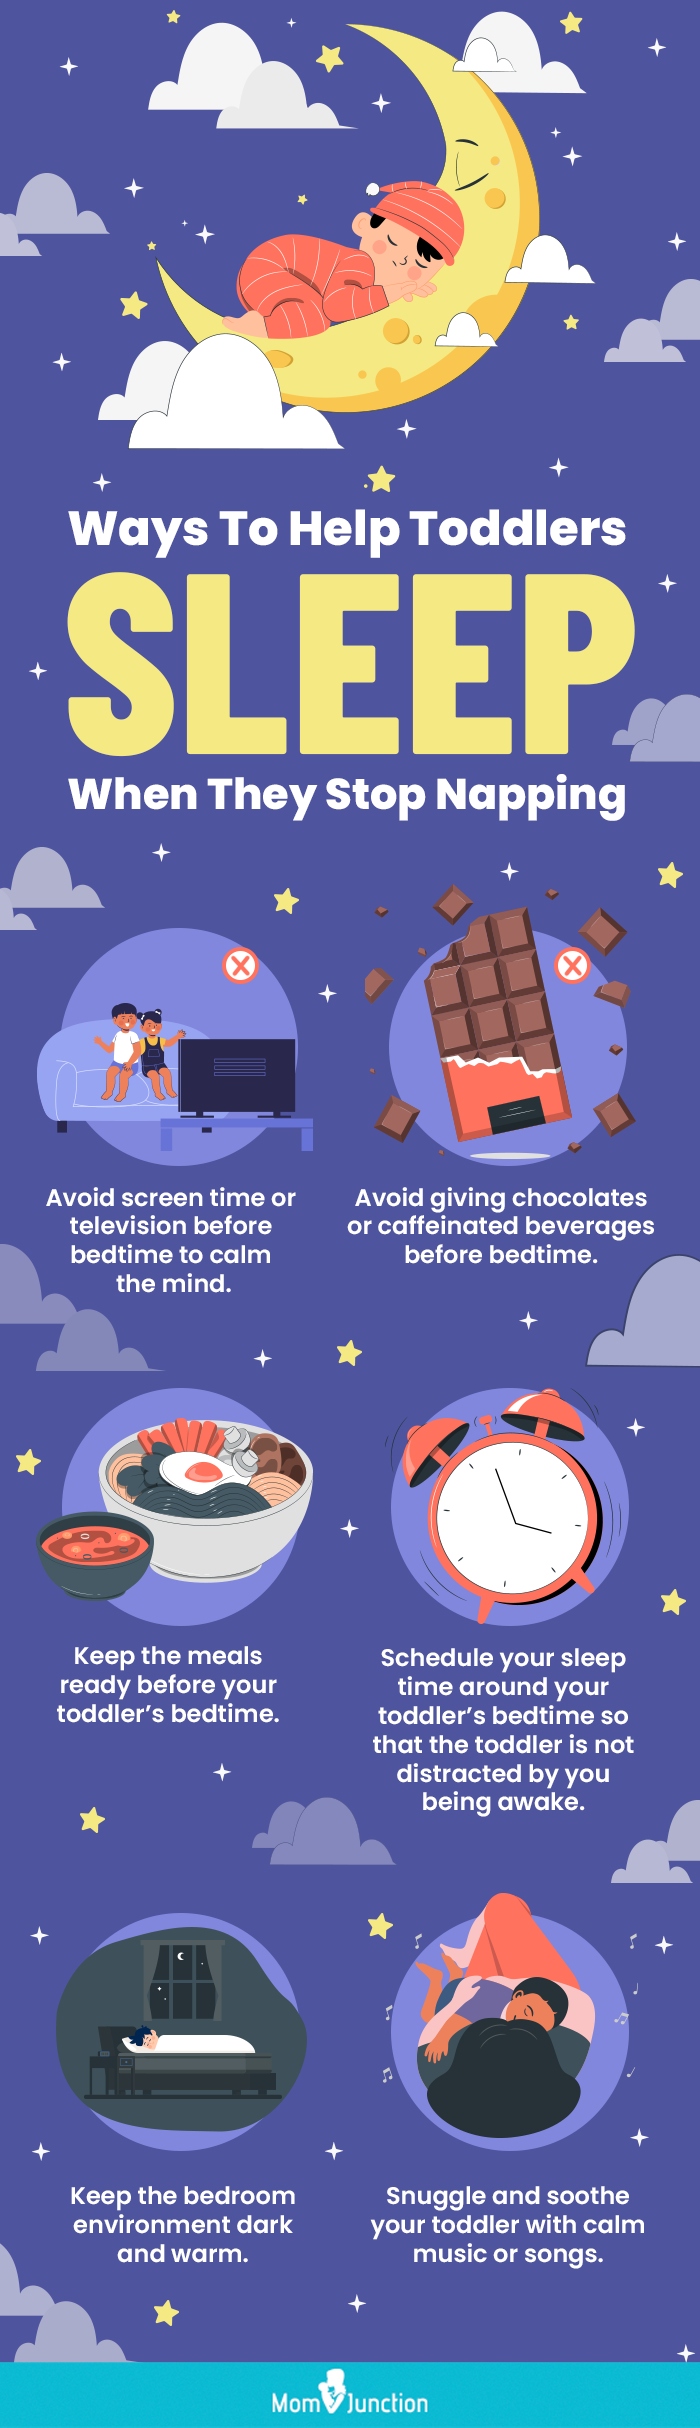 ways to help toddlers sleep when they stop napping [infographic]